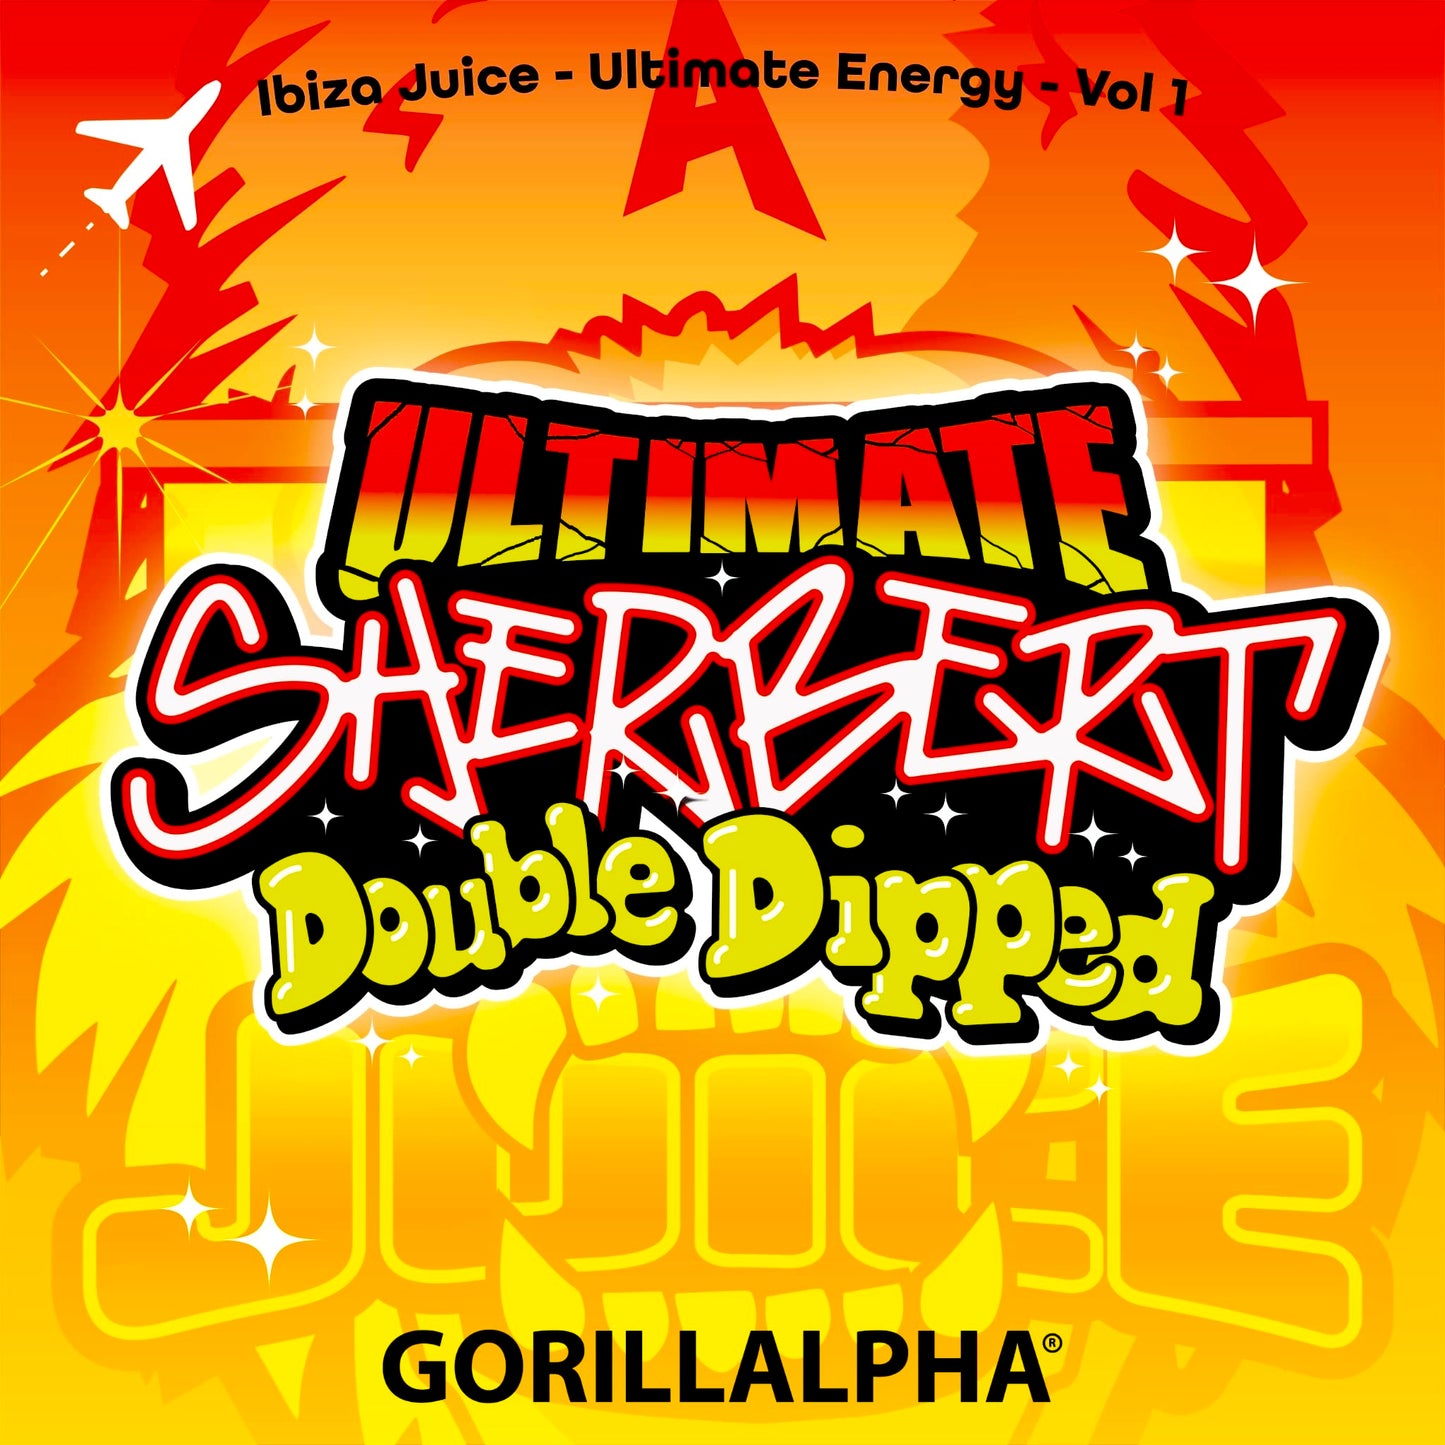 IBIZA JUICE ULTIMATE ENERGY VOL.1 - Ultimate Sherbet Double Dipped Flavour